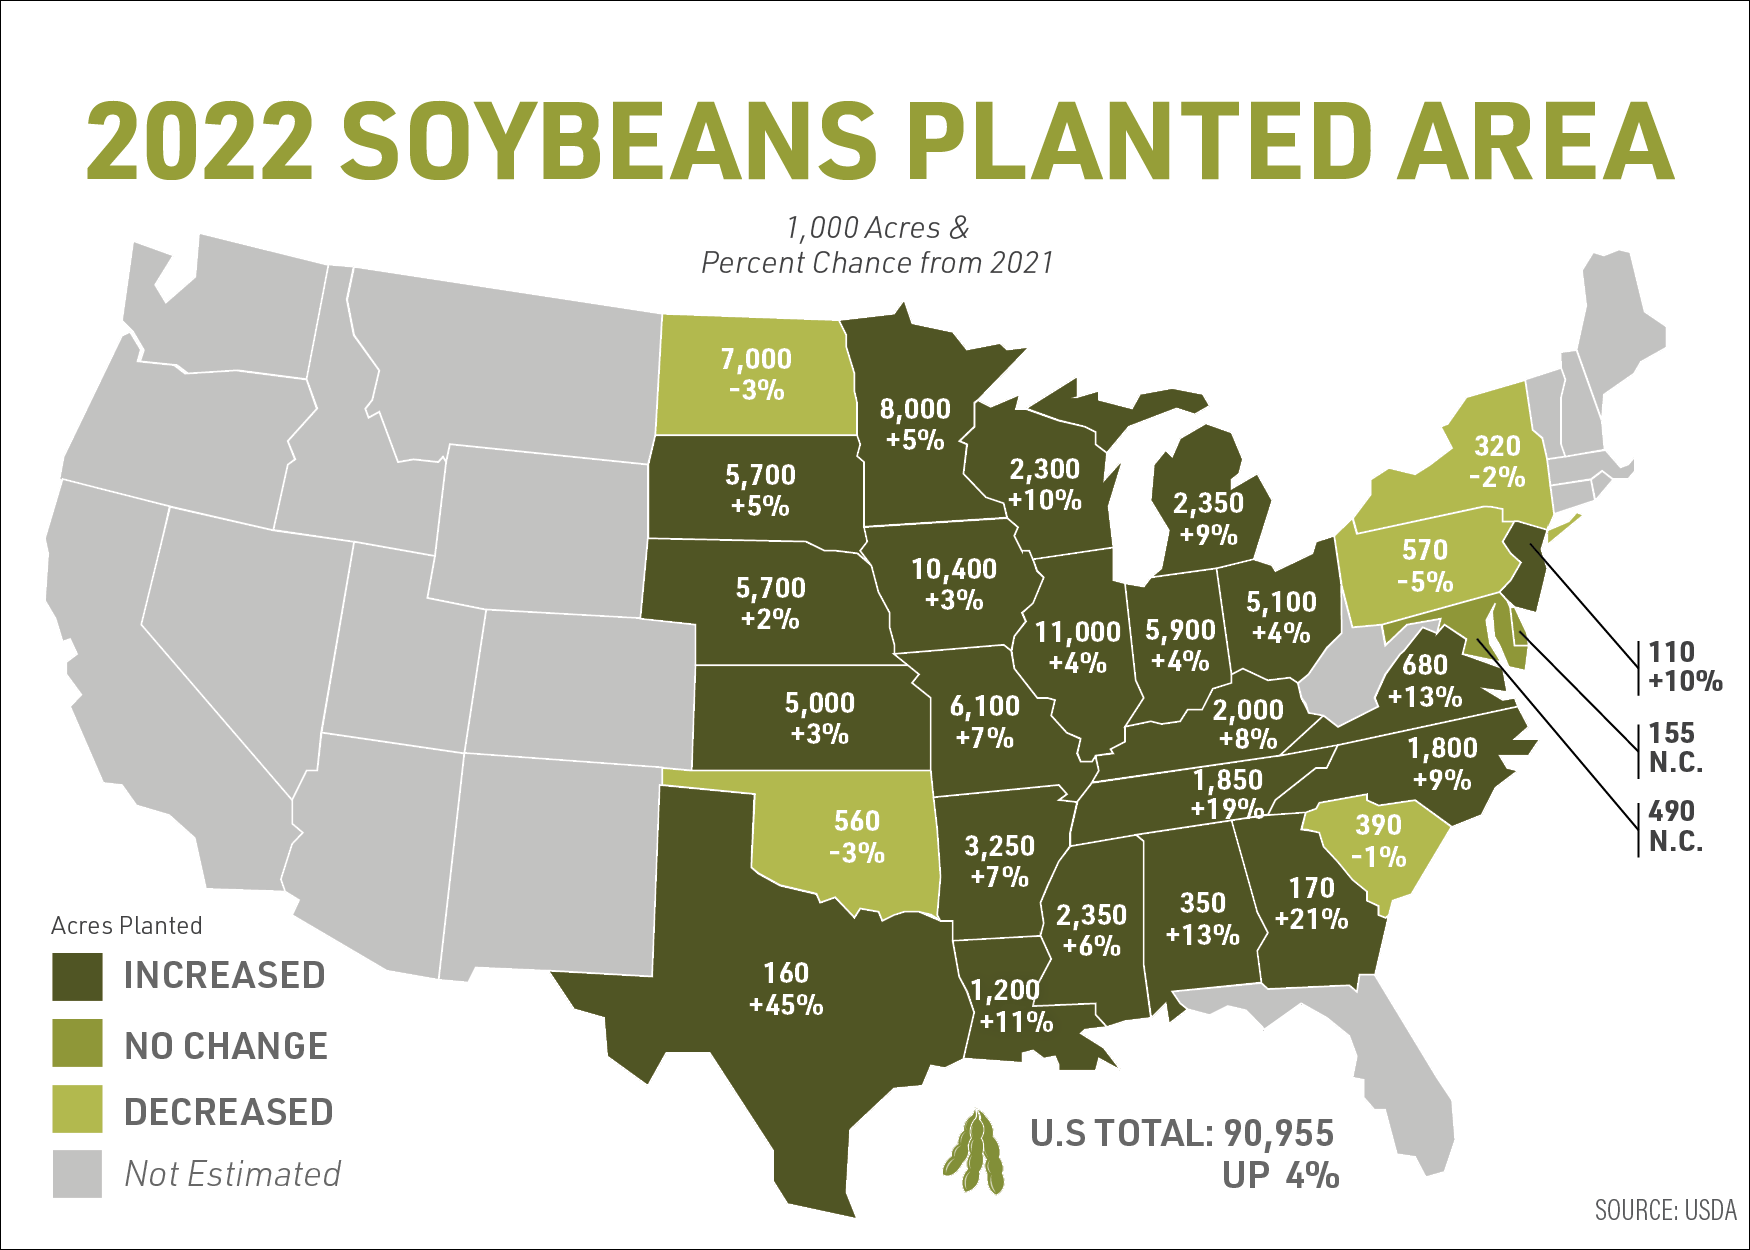 Prospective Planting Report Michigan soybean acres up 9, corn down 4